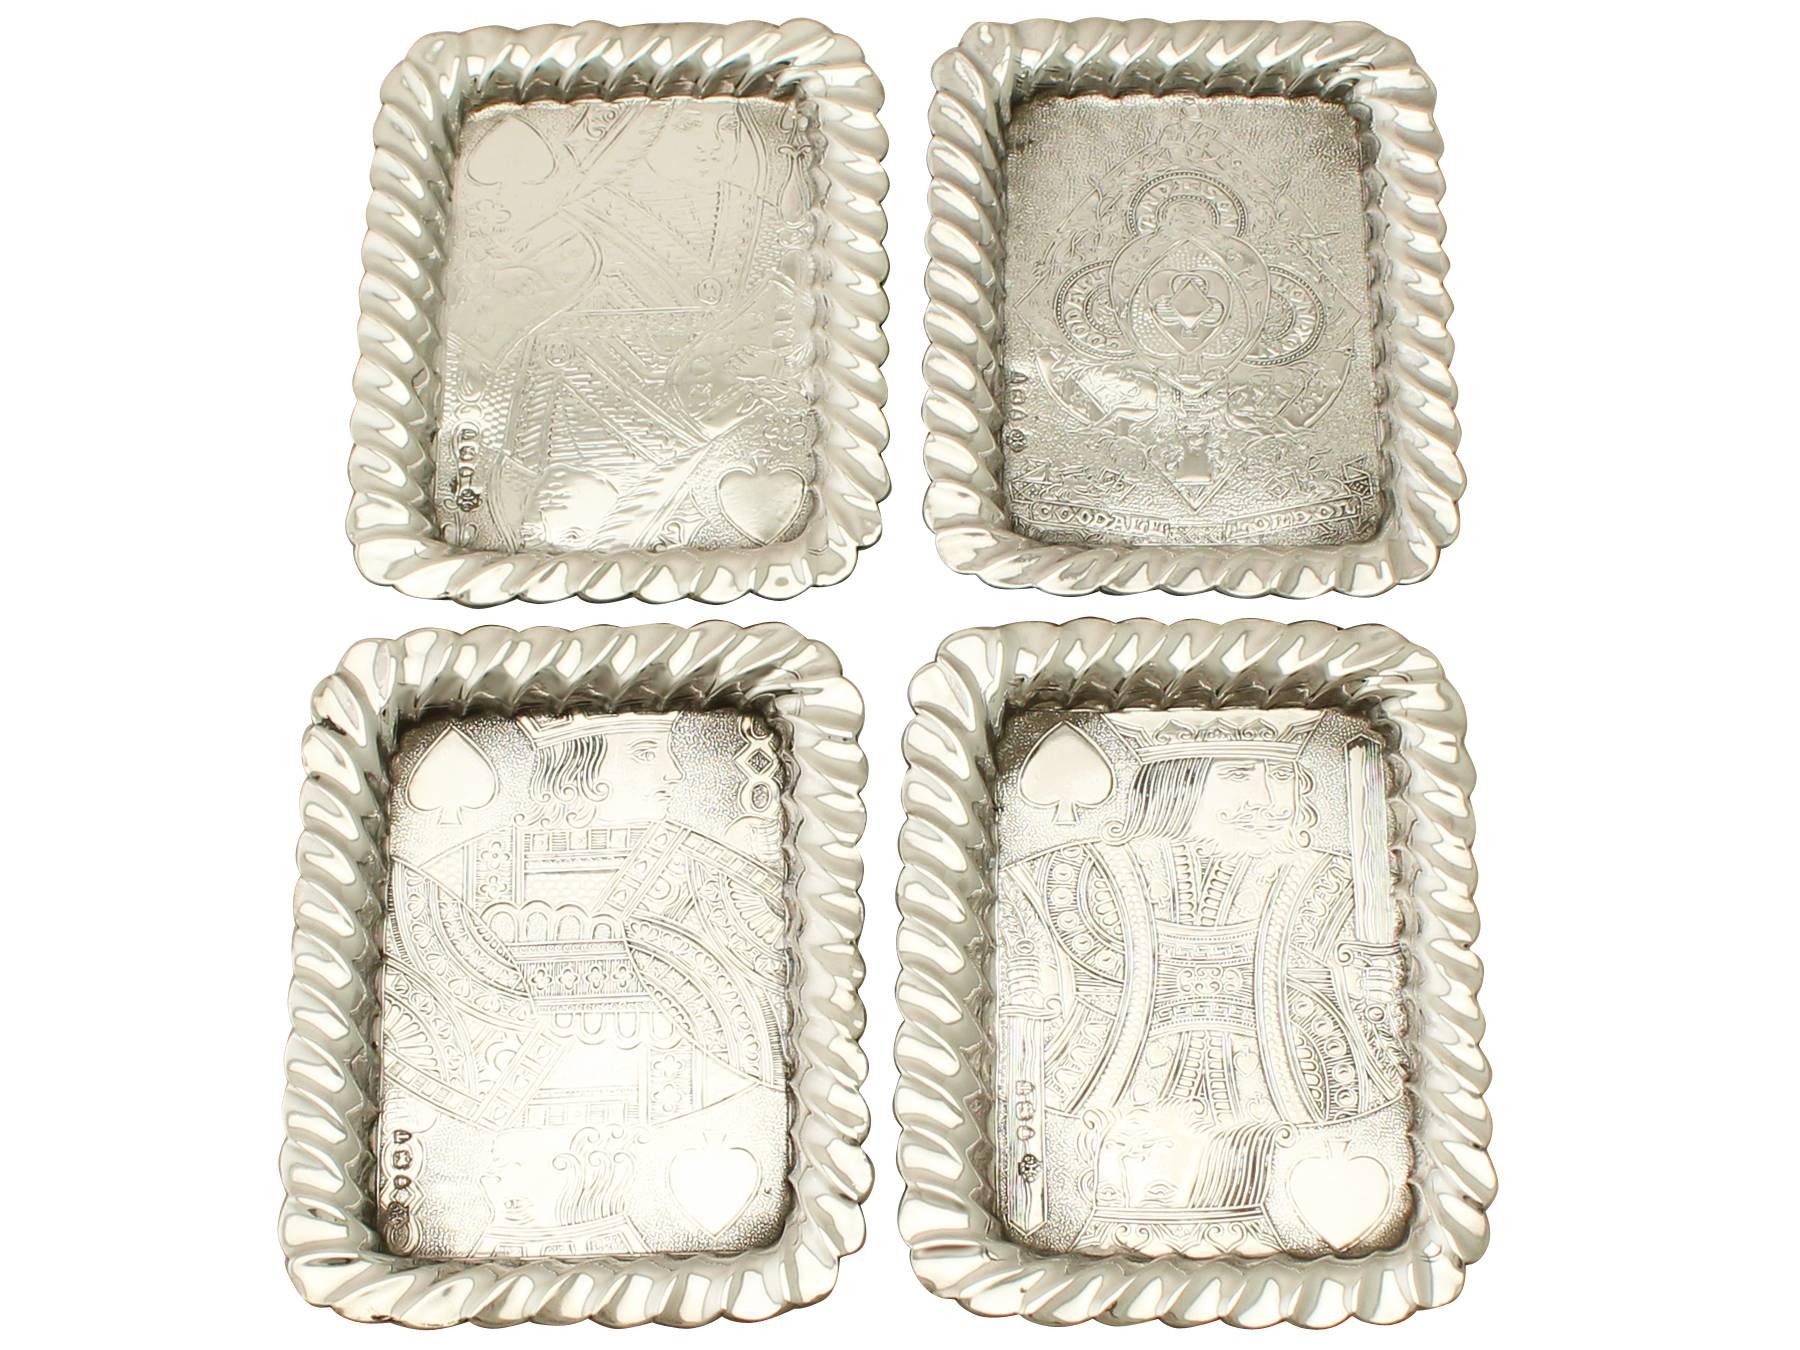 An exceptional, fine and impressive set of four antique Victorian English sterling silver playing card trays; an addition to our range of collectible silverware

These exceptional antique Victorian sterling silver playing card trays have a